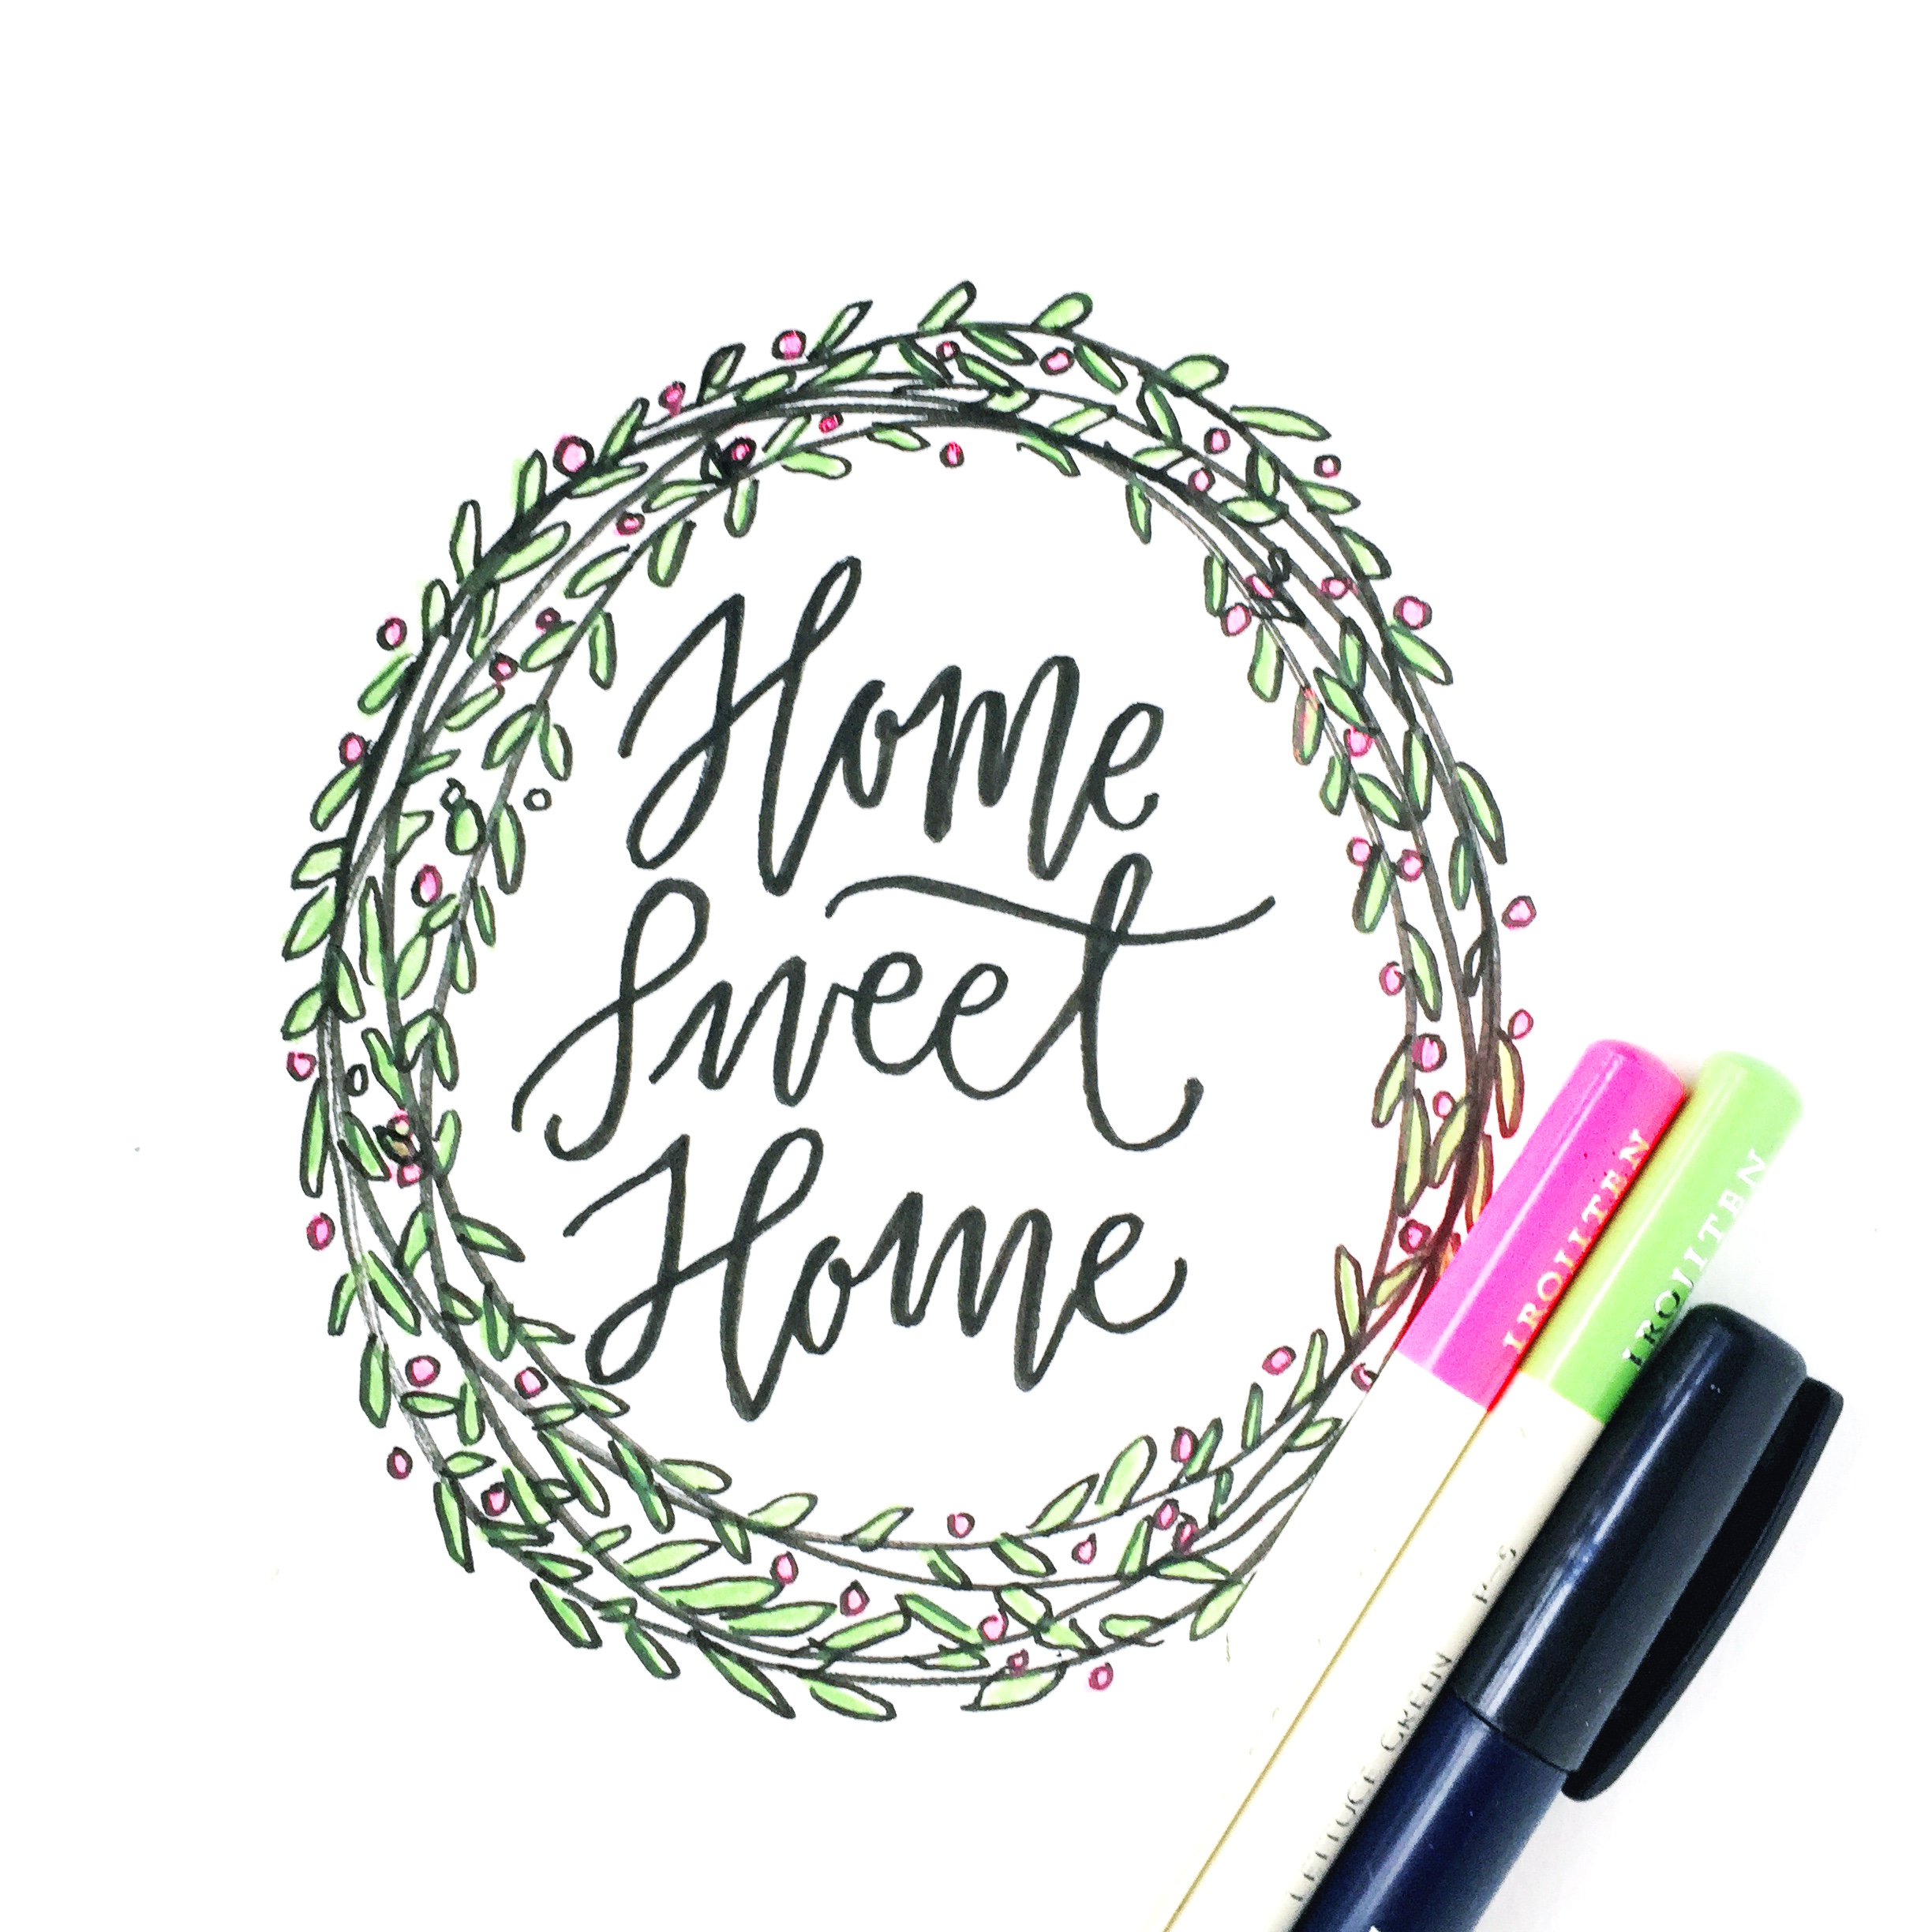 Learn 3 fun ways to illustrate your own creative wreaths paired with modern brush calligraphy using @tombowusa products and @pantone 's color of the year: greenery! @Renmadecalligraphy gives you step by step directions on how to create your own spin on these unique art pieces. 